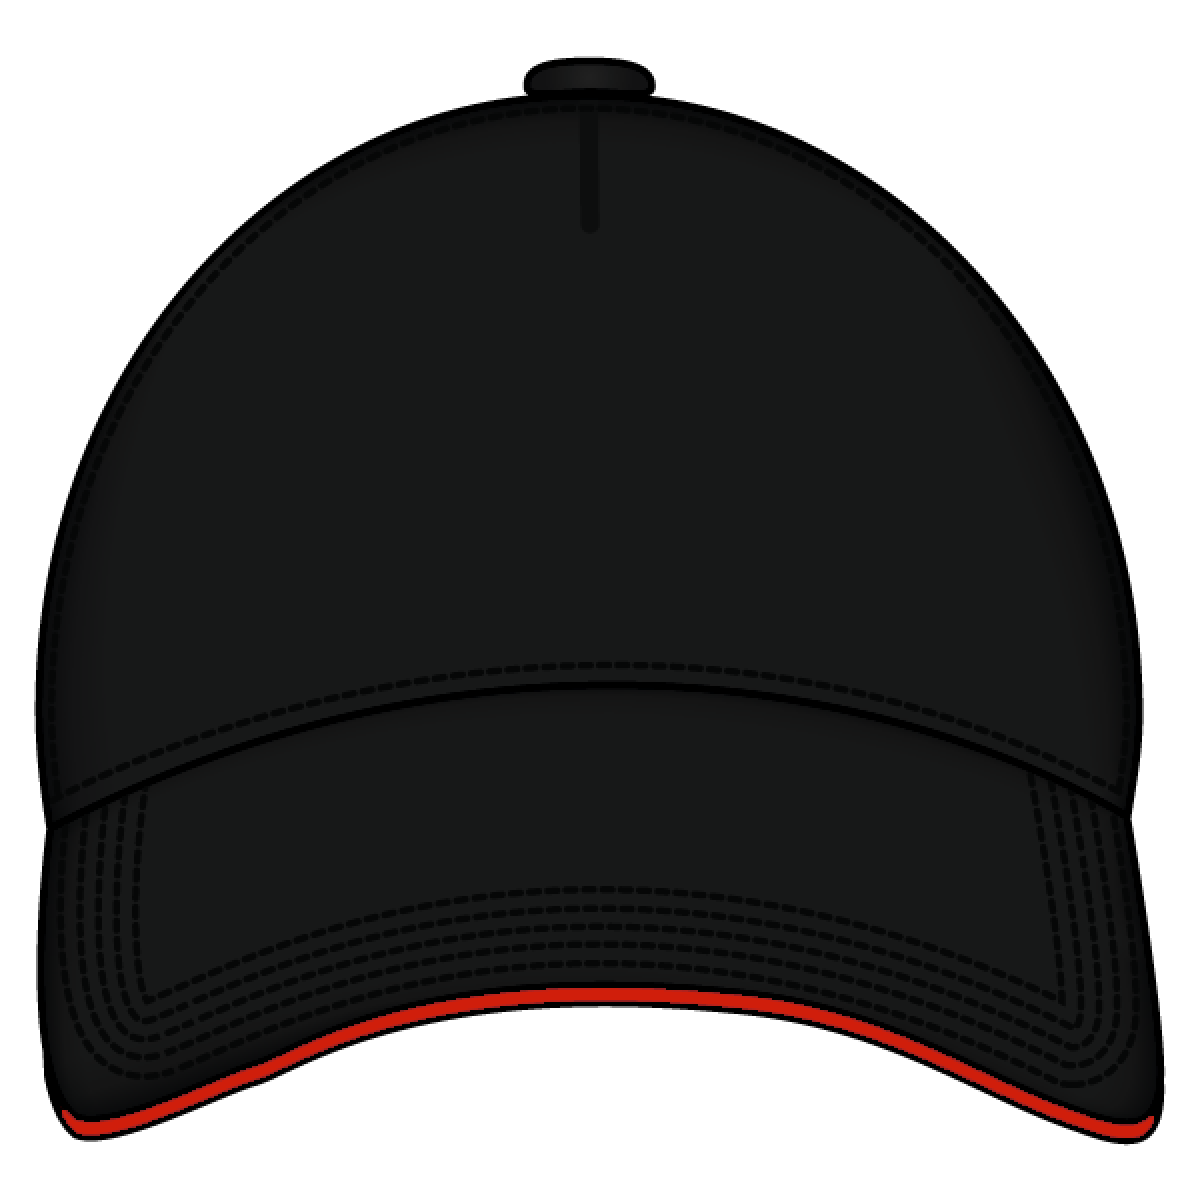 Best Photos of Red Baseball Hat Template - Red Baseball Cap Clip ...